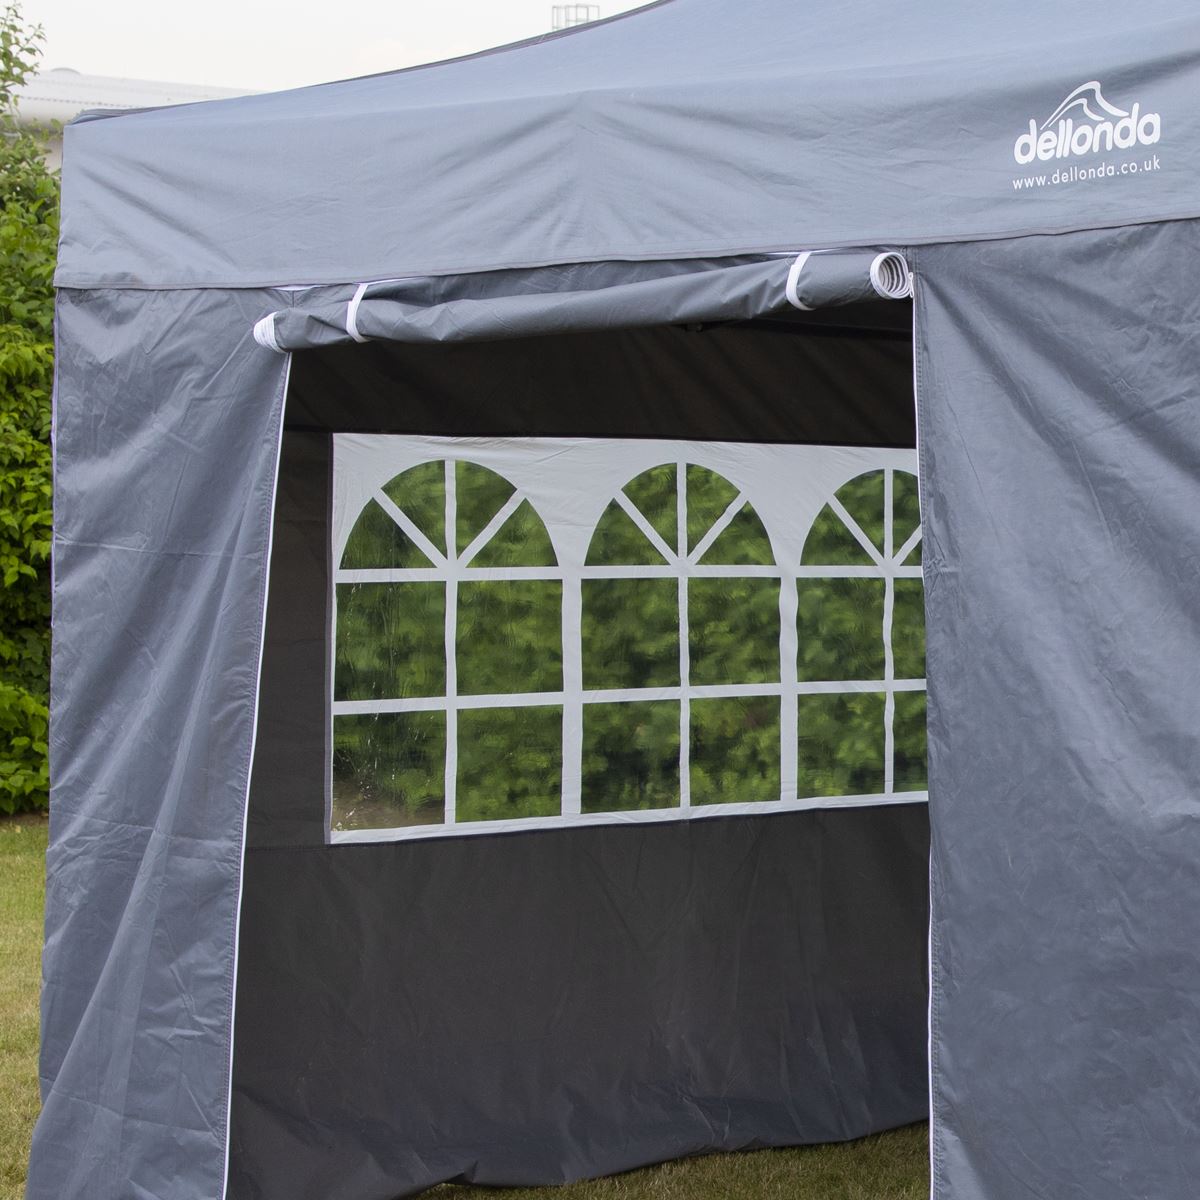 Dellonda Premium 3x3m Pop-Up Gazebo & Side Walls, PVC Coated, Water Resistant Fabric with Carry Bag, Rope, Stakes & Weight Bags - Grey